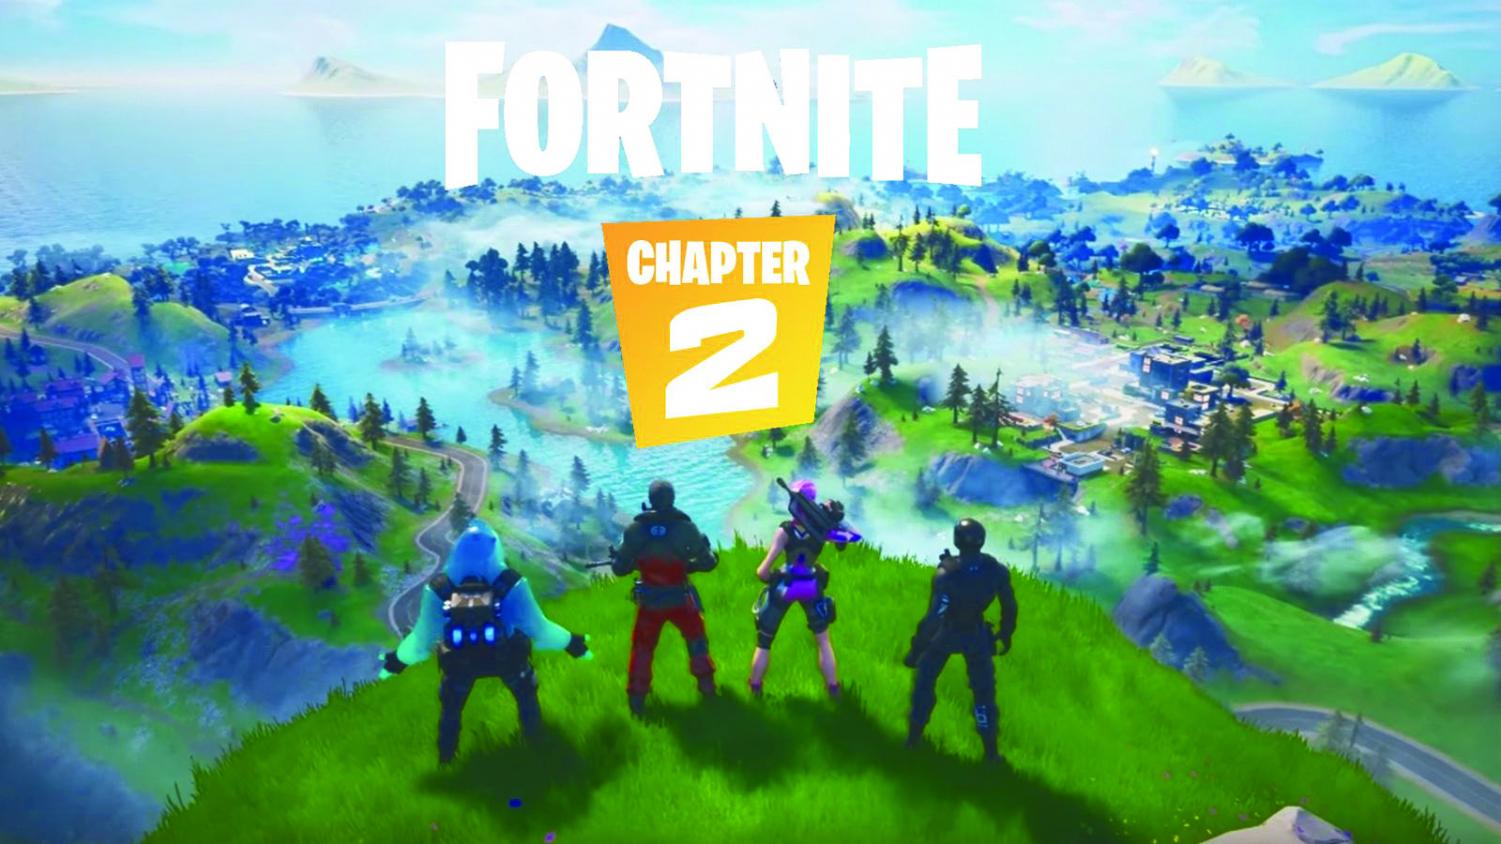 What day will Fortnite Chapter 2 end?